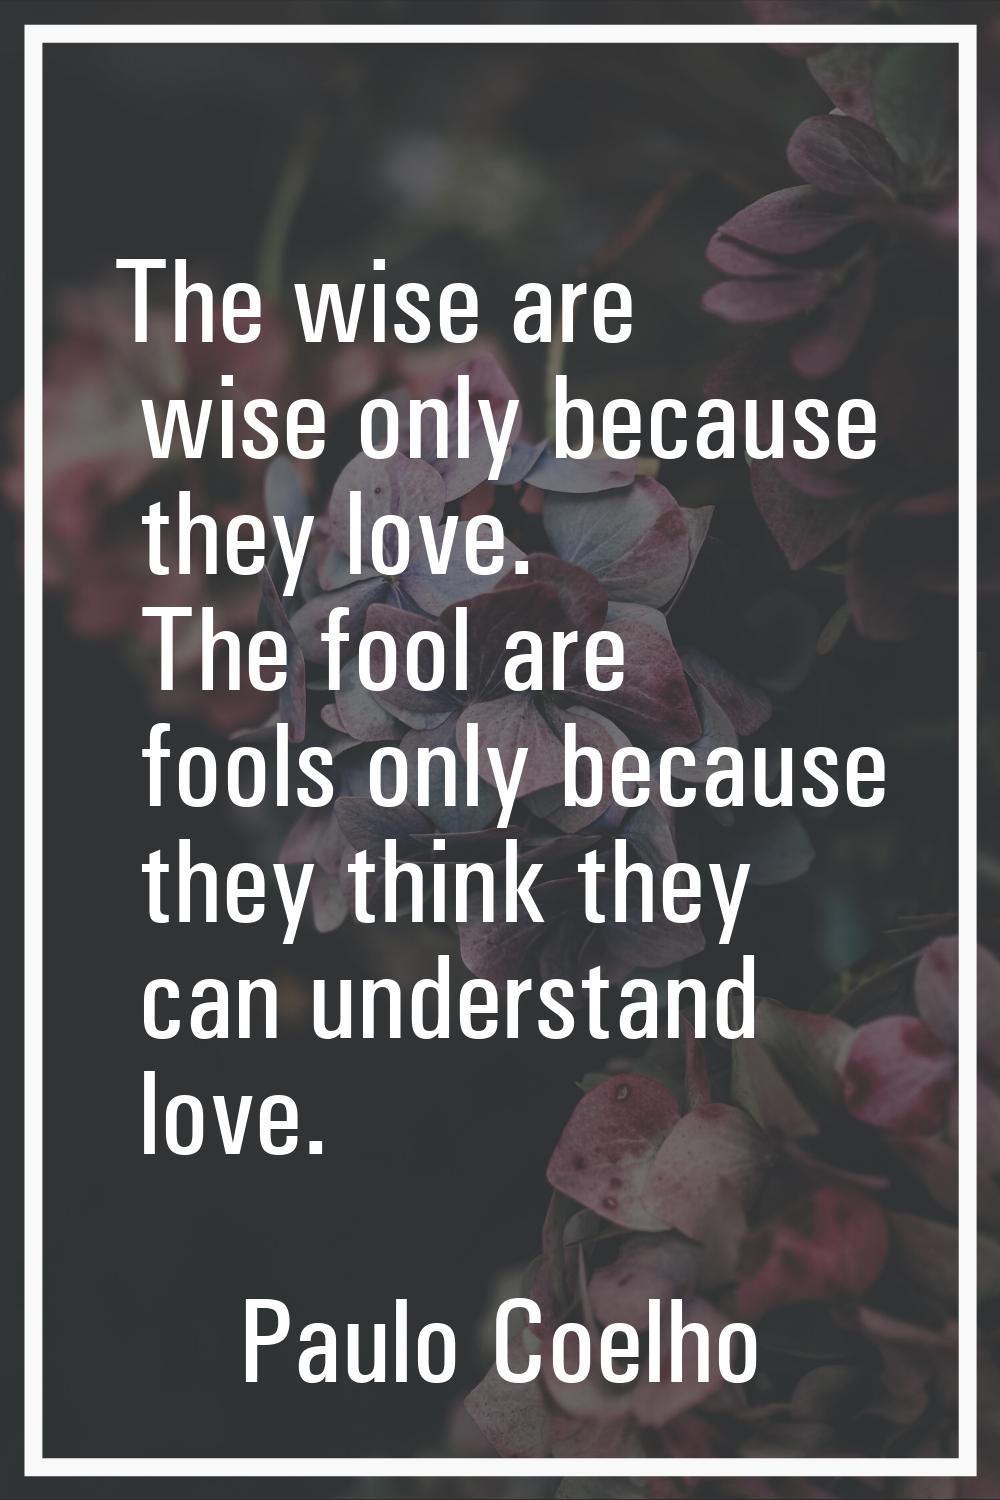 The wise are wise only because they love. The fool are fools only because they think they can under